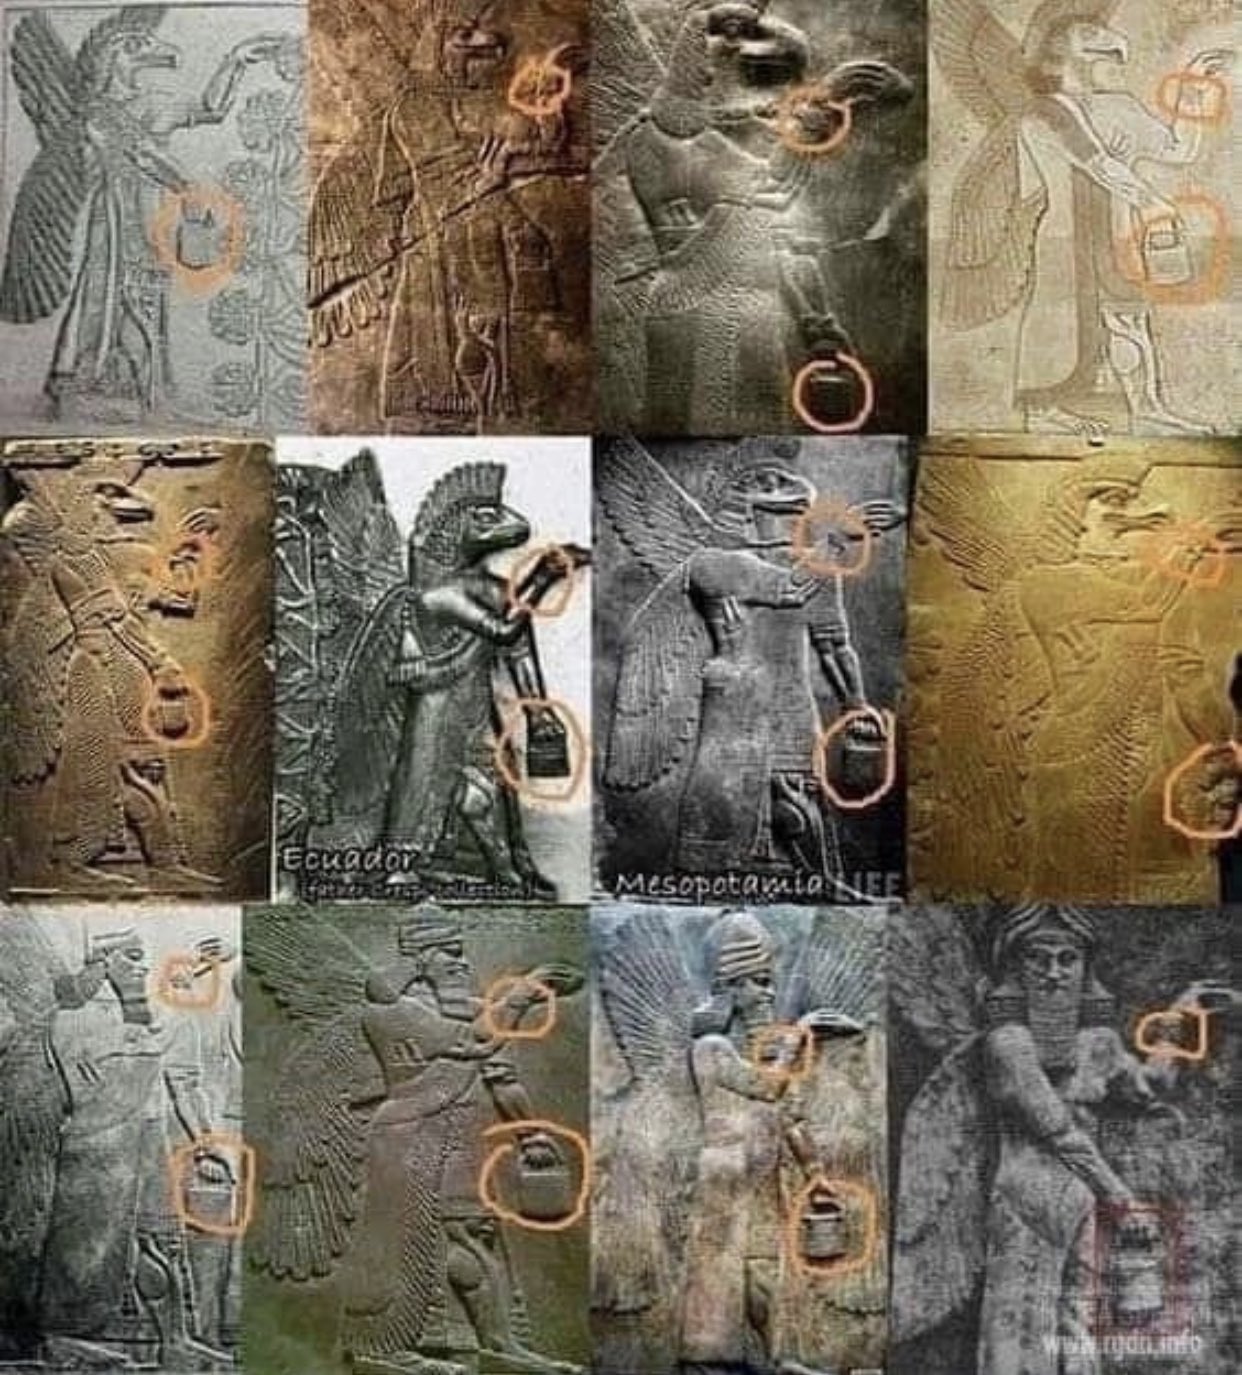 Sumerian gods' Handbags, Pinecones and the Mesopotamian “Tree of Life”  - the Truth about all 3 